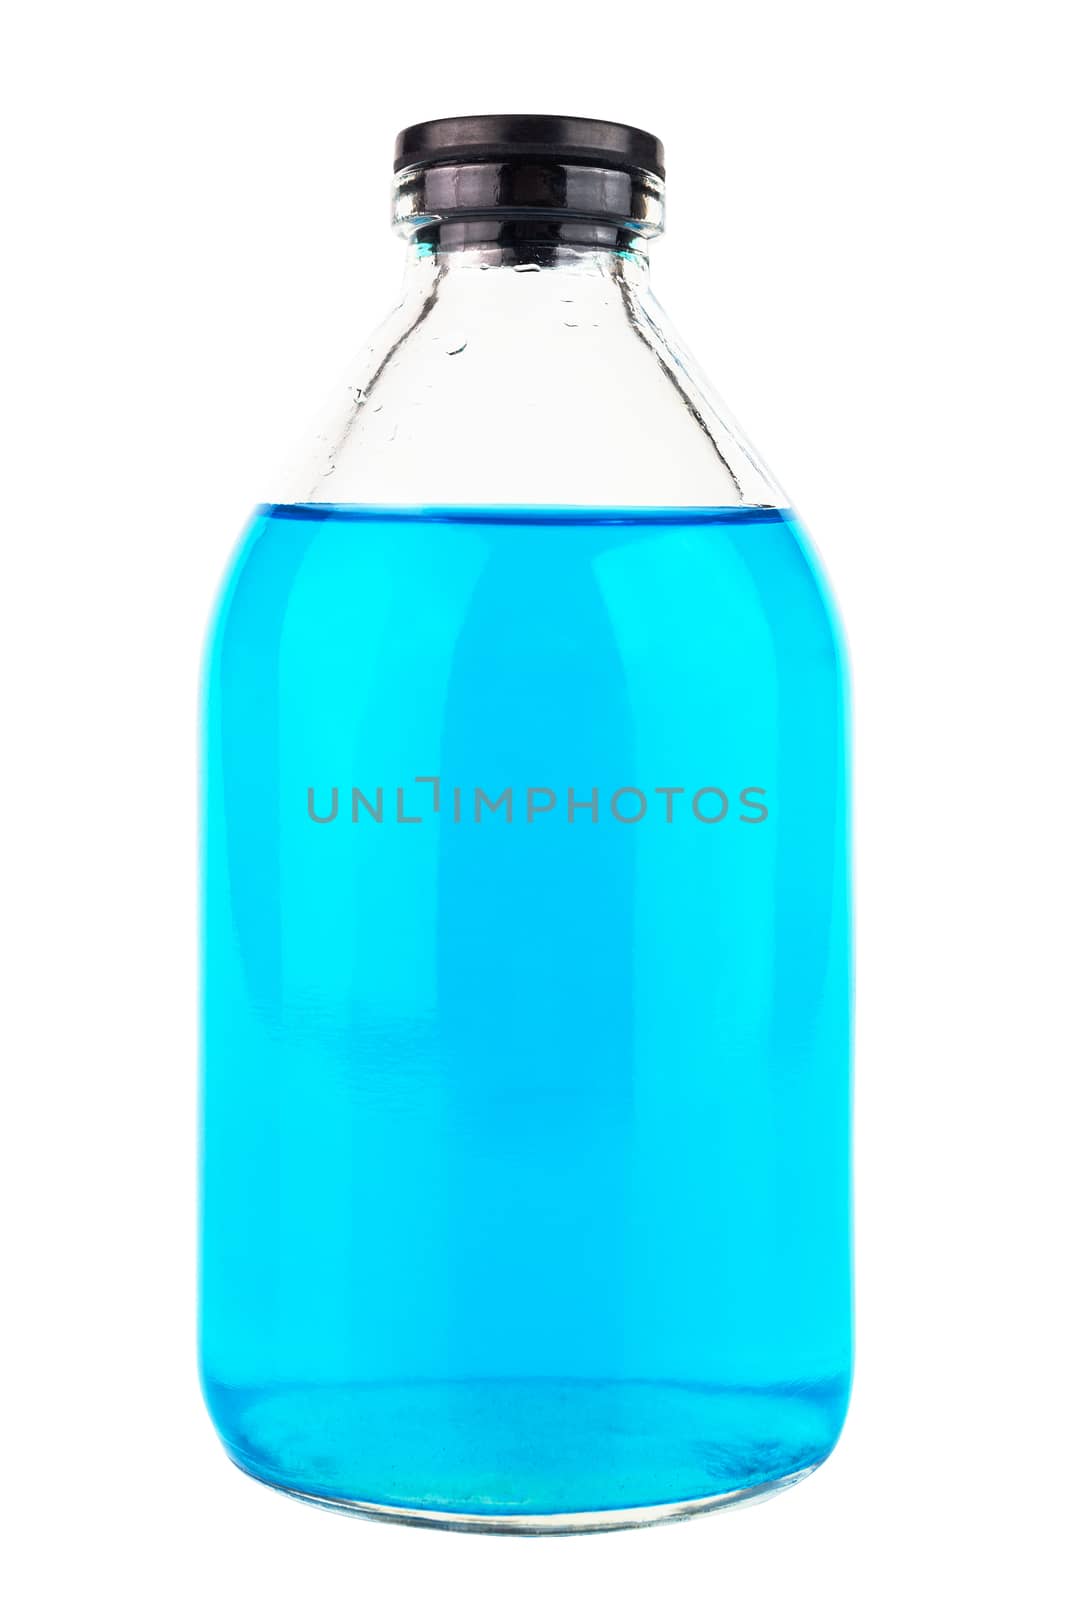 old style glass medical or chemical bottle with blue transparent liquid isolated on white background, closed with black rubber cap